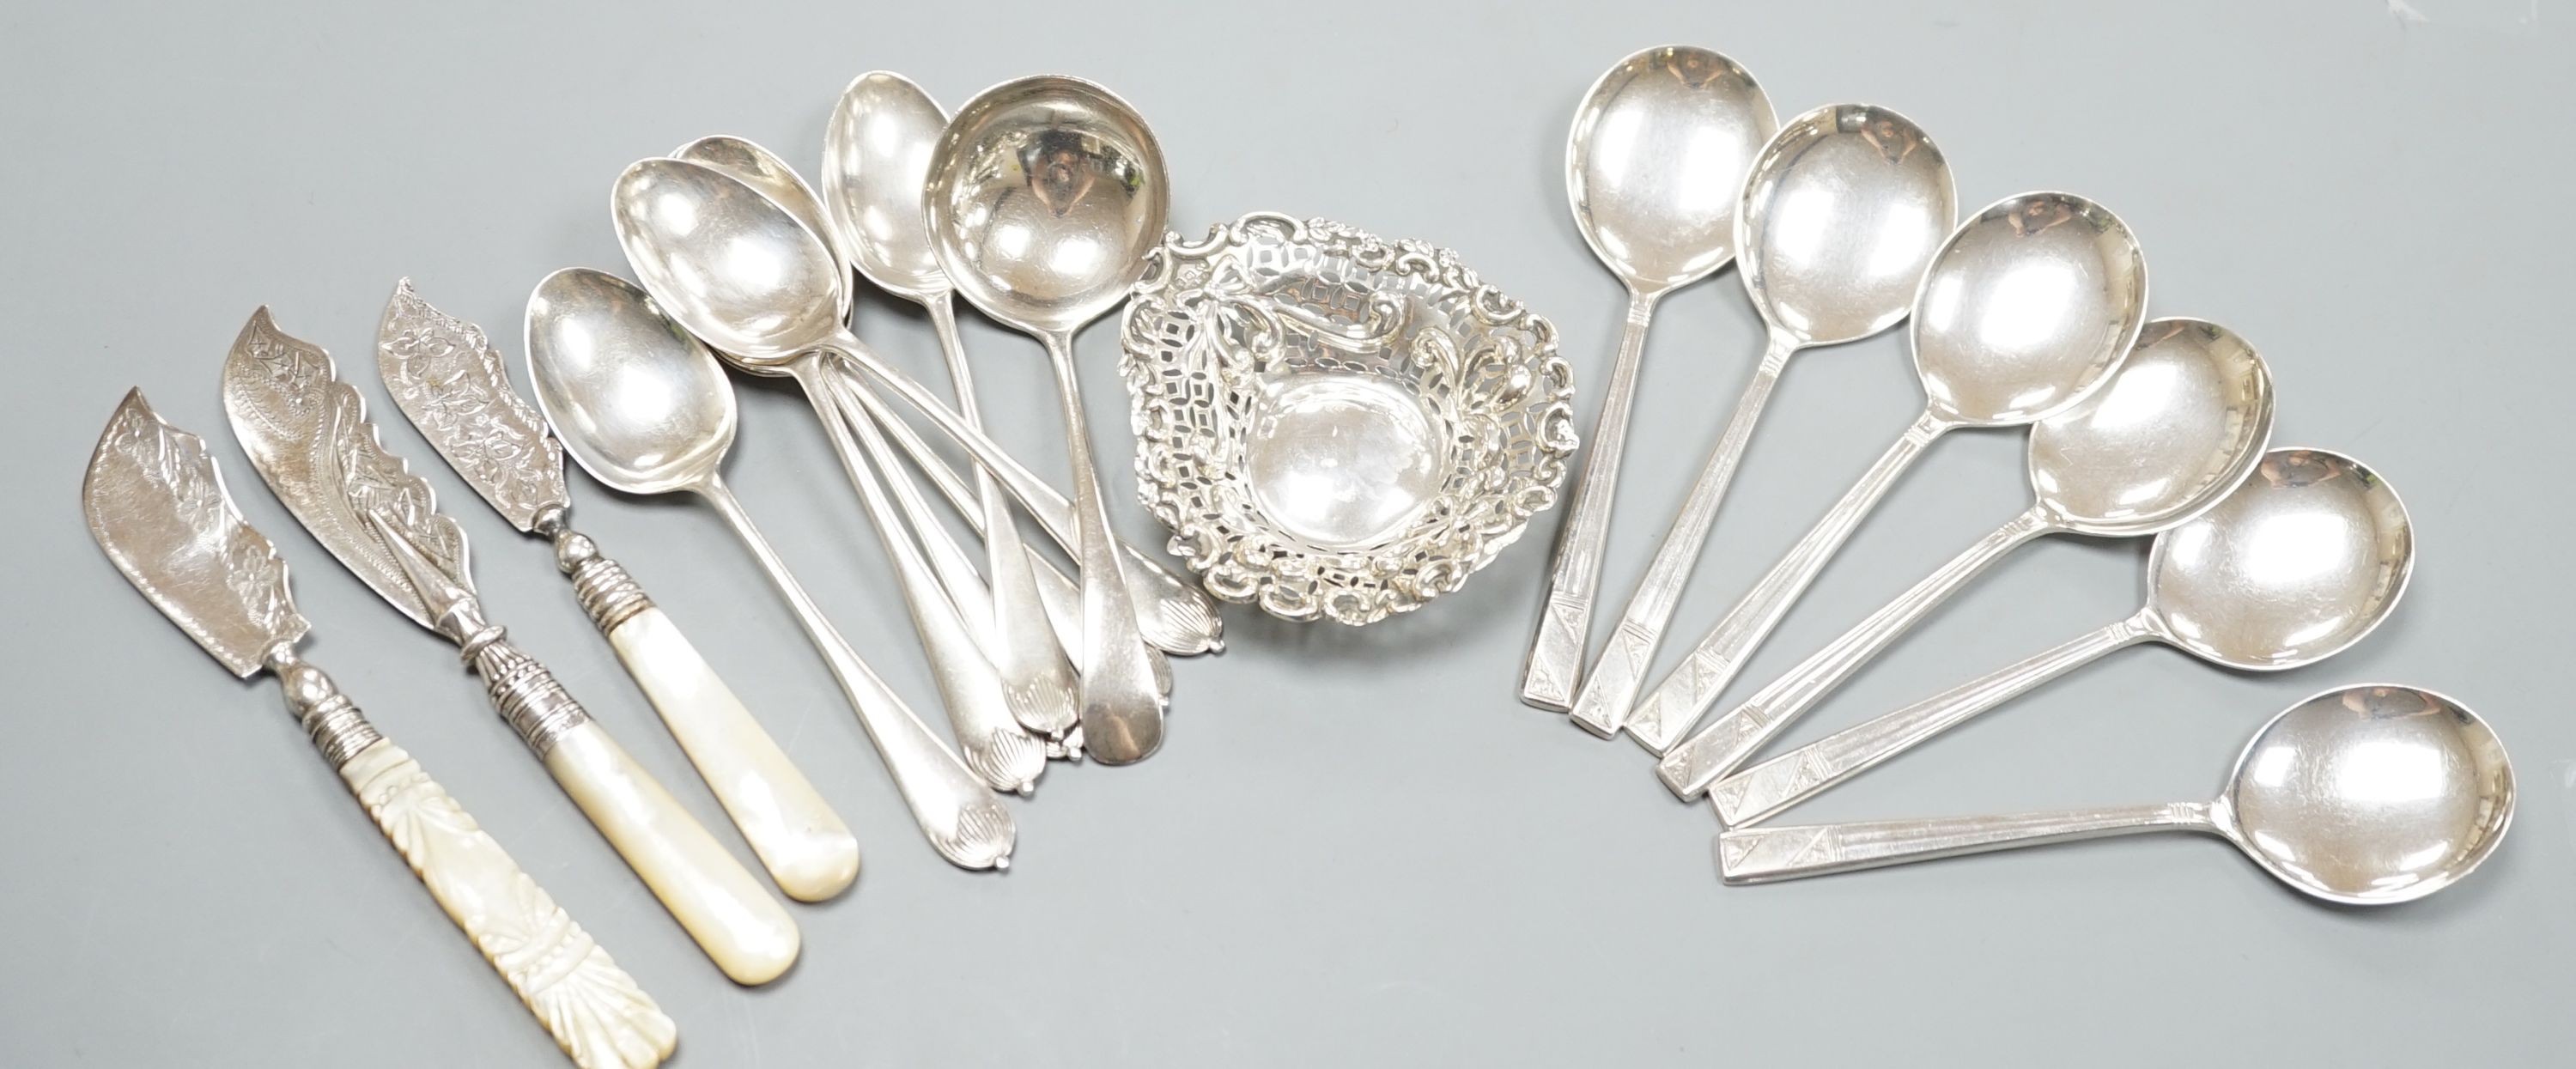 A late Victorian repousse silver bonbon dish, 91mm an assorted silver cutlery including three Victorian mother of pearl handled butter knives, a sauce ladle and two sets of six spoons including soup, weighable silver 11.